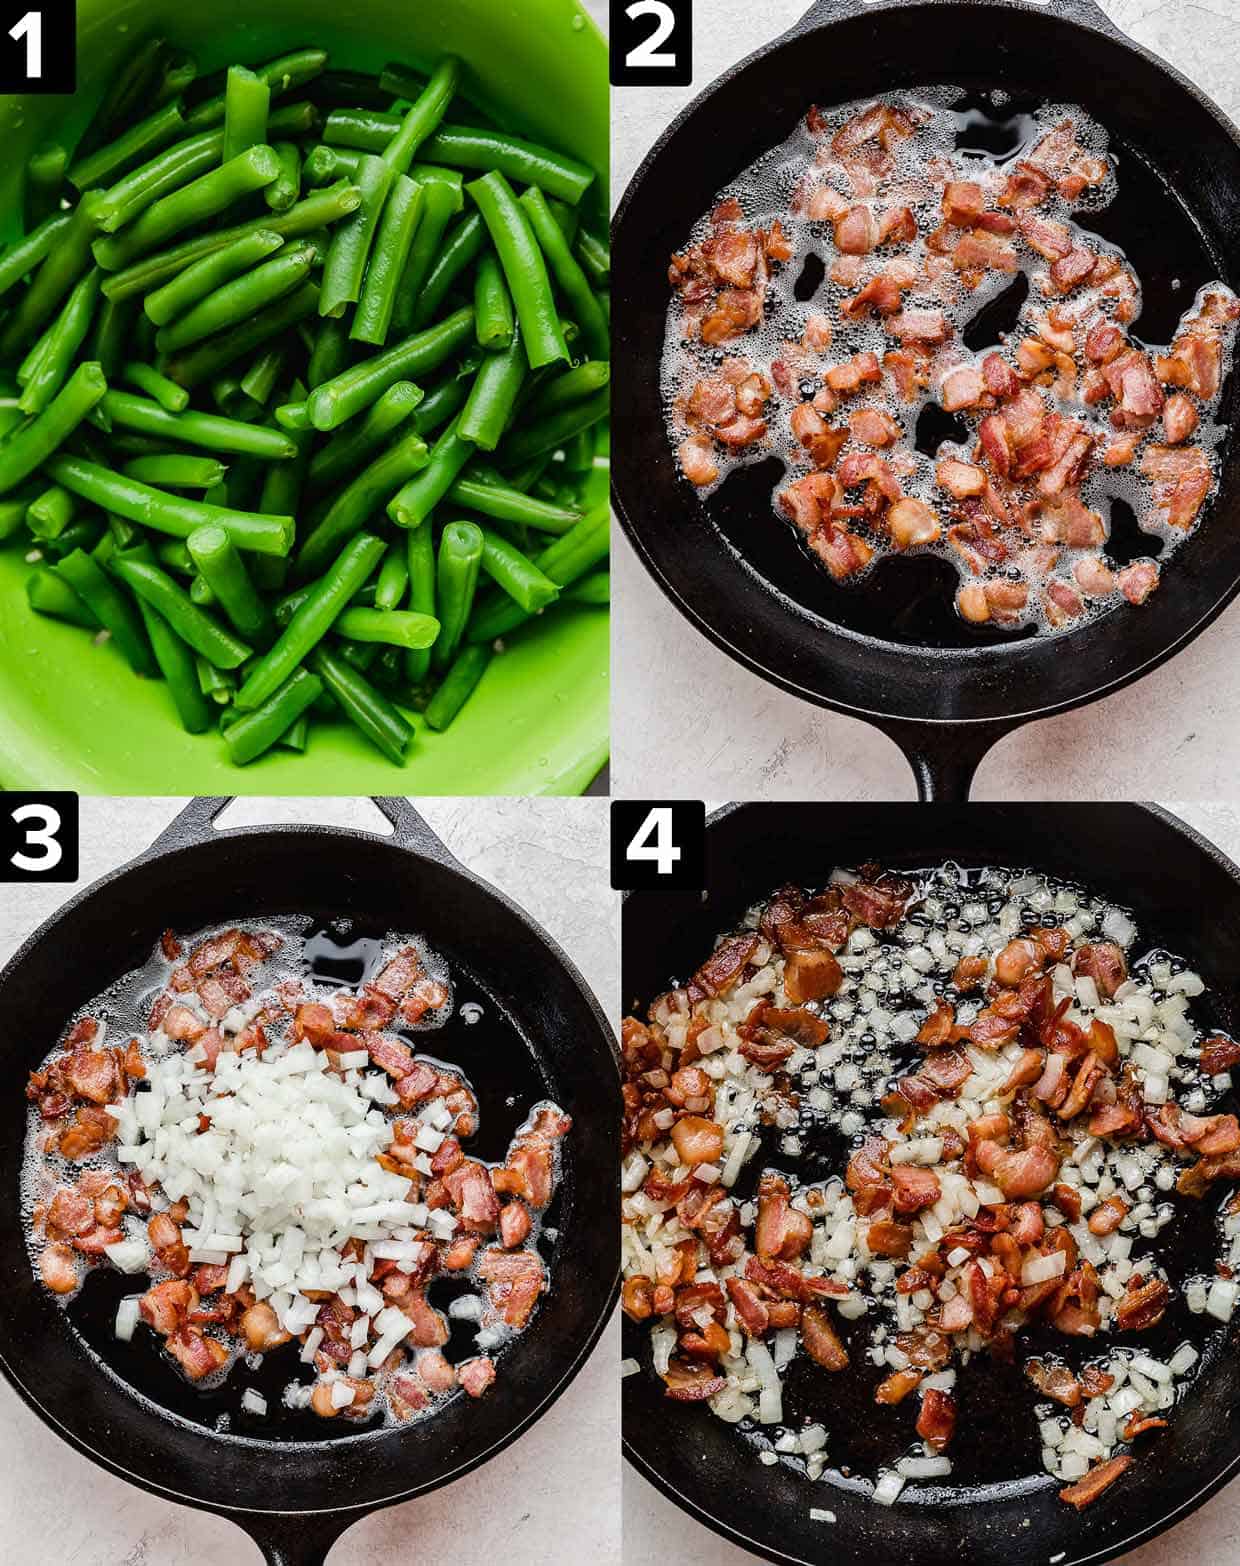 A four photo collage showing how to make Bacon Green Bean Casserole: from top left to bottom right, fresh green beans, bacon cooking black skillet, onion added to the cooked bacon, onion and bacon in skillet but cooked.